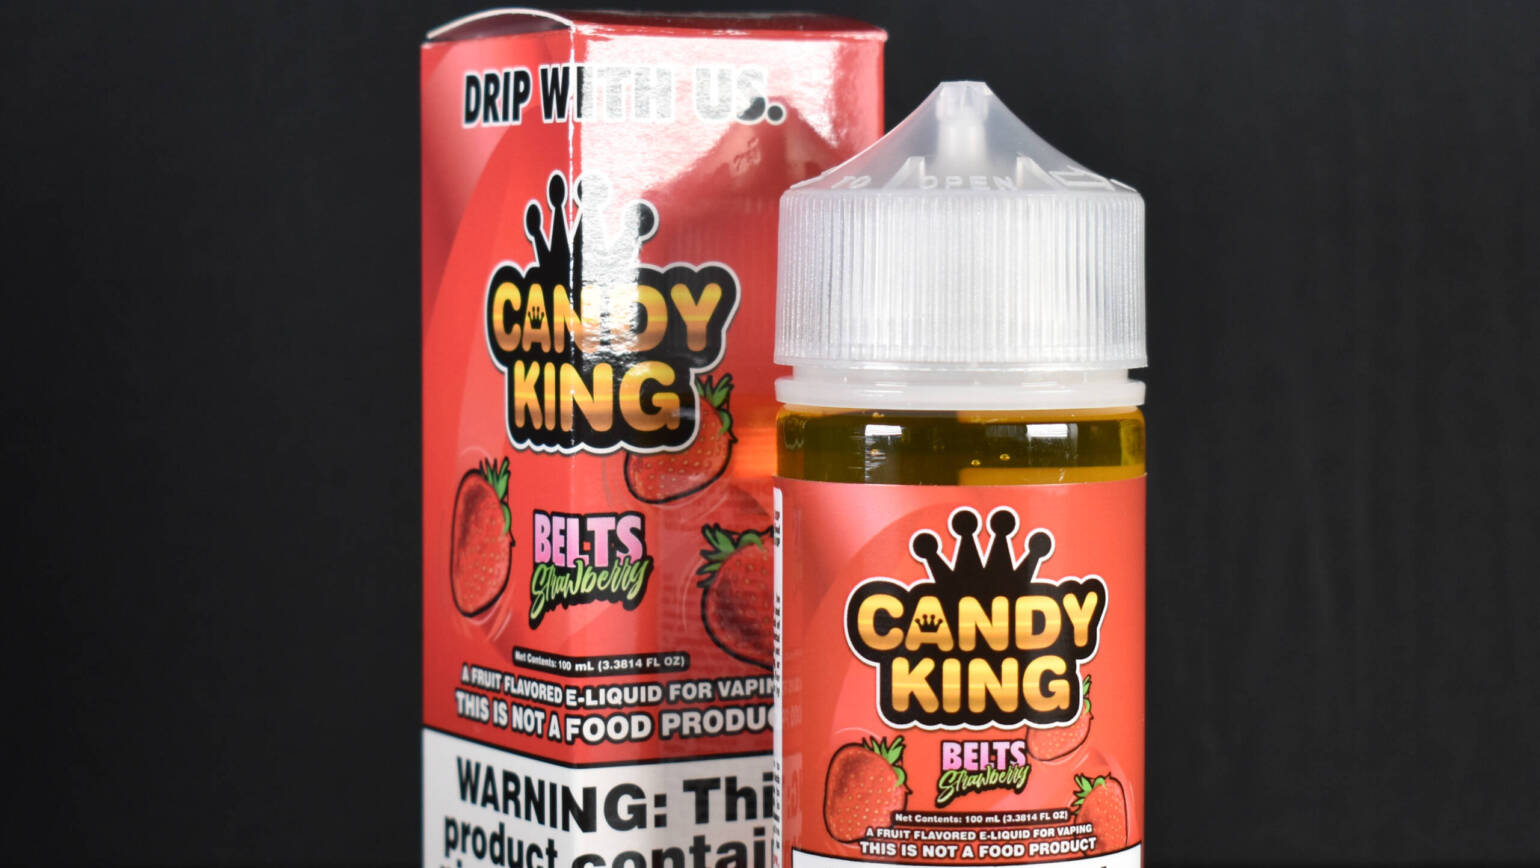 Candy King – Belts